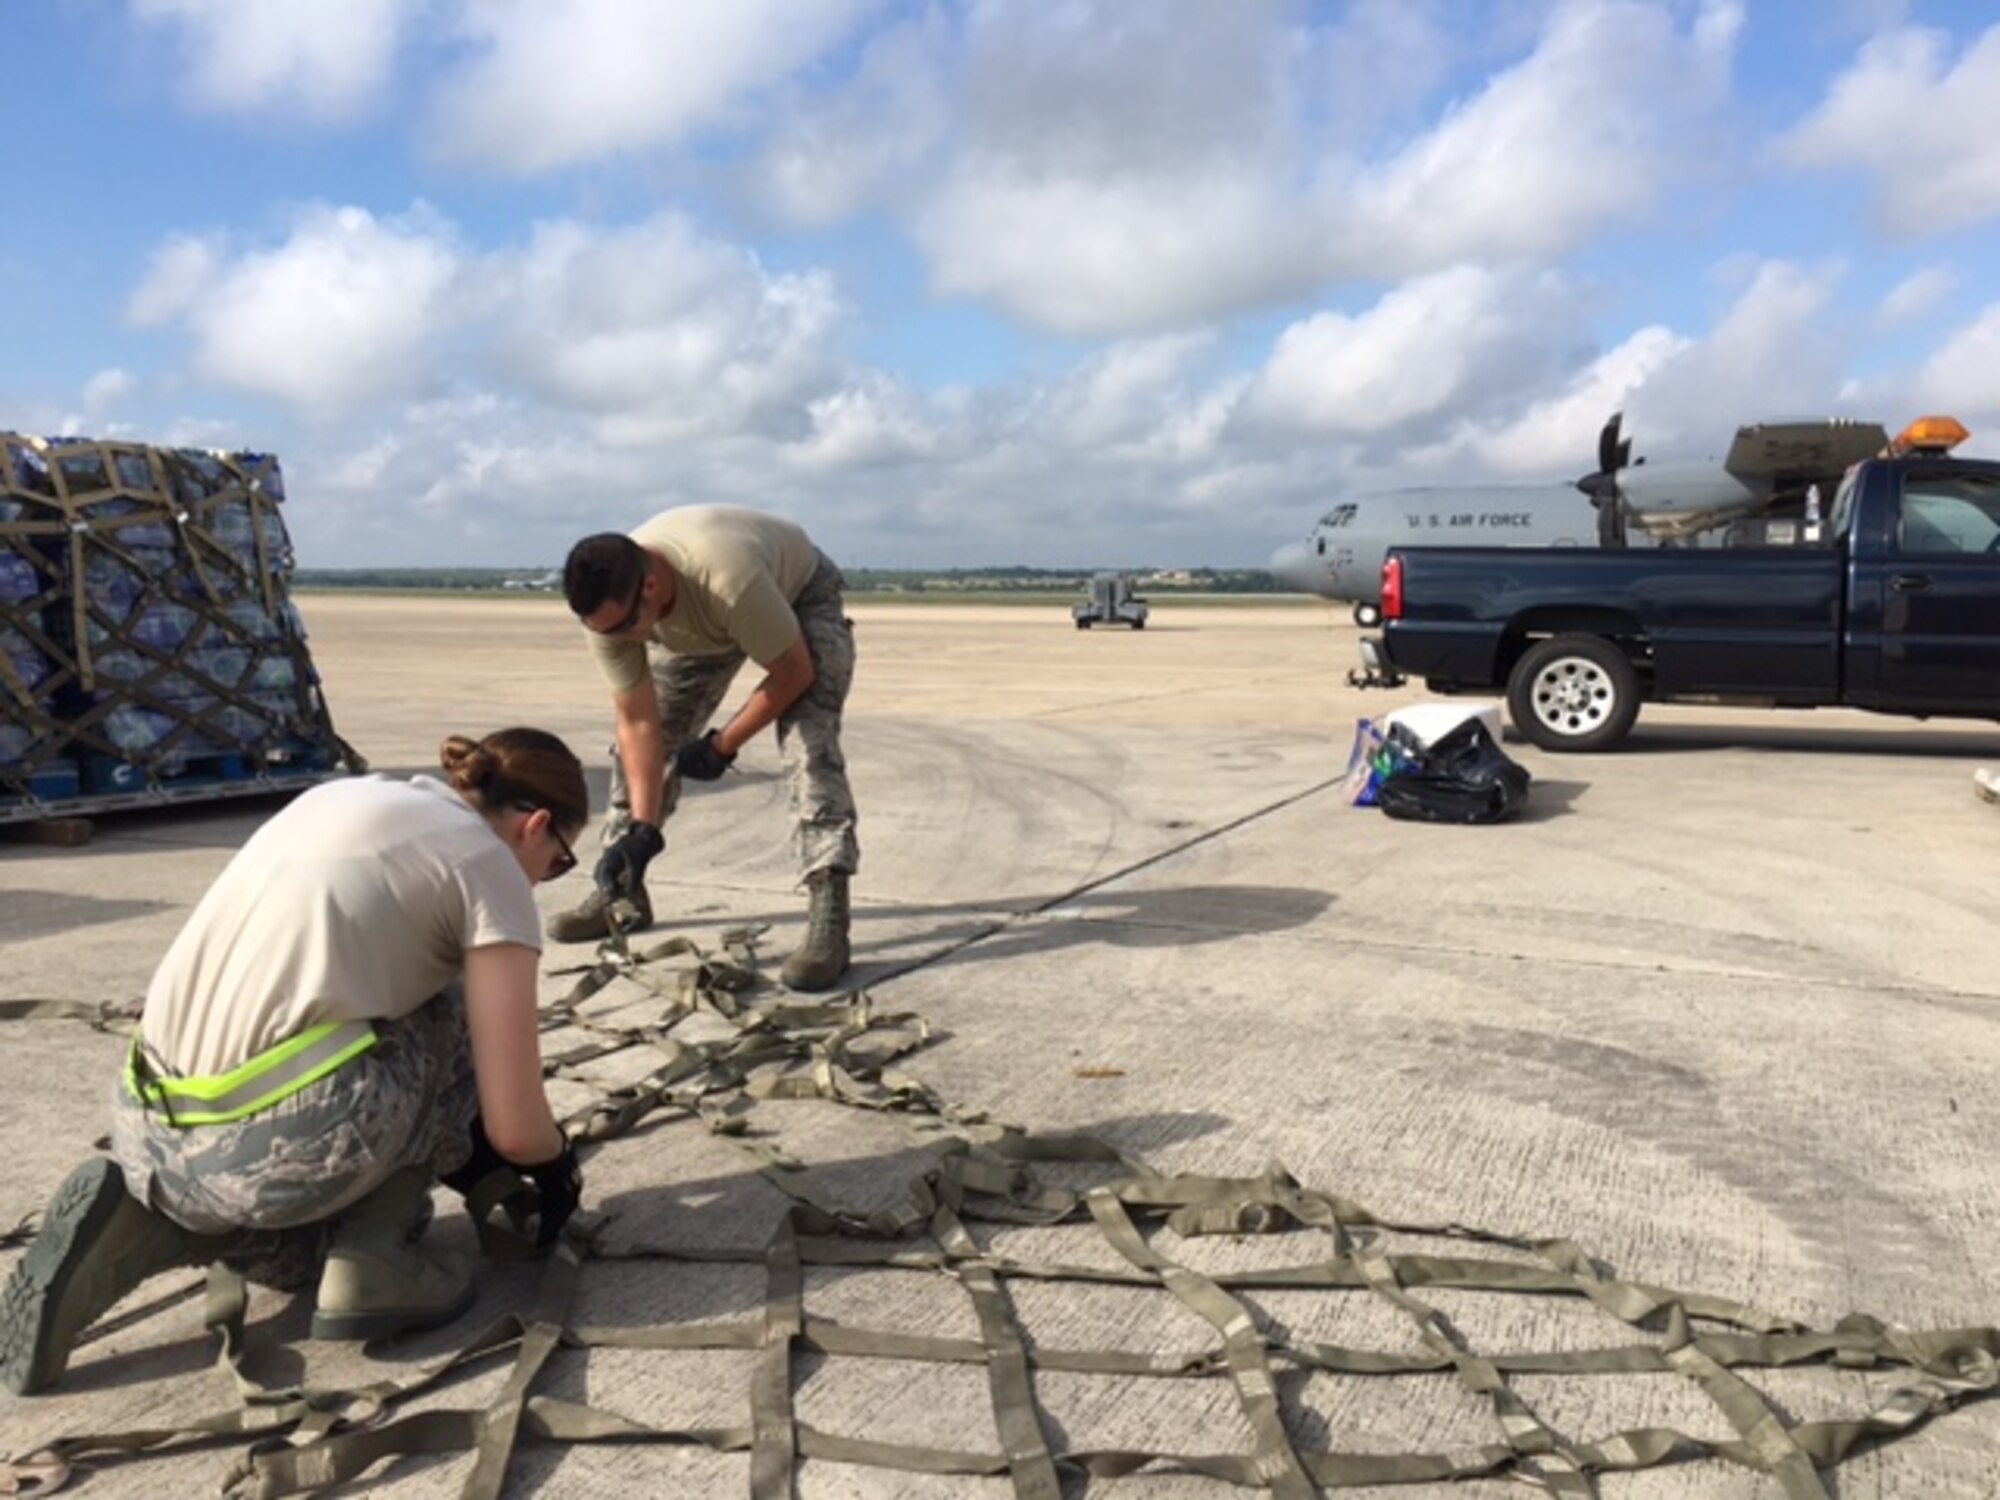 Senior Airman Sarah Nededog (fore) and Tech. Sgt. Antonio Montano, 502nd Logistics Readiness Squadron traffic management office, straighten out cargo straps to help prepare Hurricane Maria relief supplies for air transport Sept. 22, 2017 at Joint Base San Antonio-Kelly Field.  The supplies were being staged at the Federal Emergency Management Agency’s Incident Support Base at Kelly for transport to areas devastated by Hurricane Maria (U.S. Air Force image/Dan Hawkins)